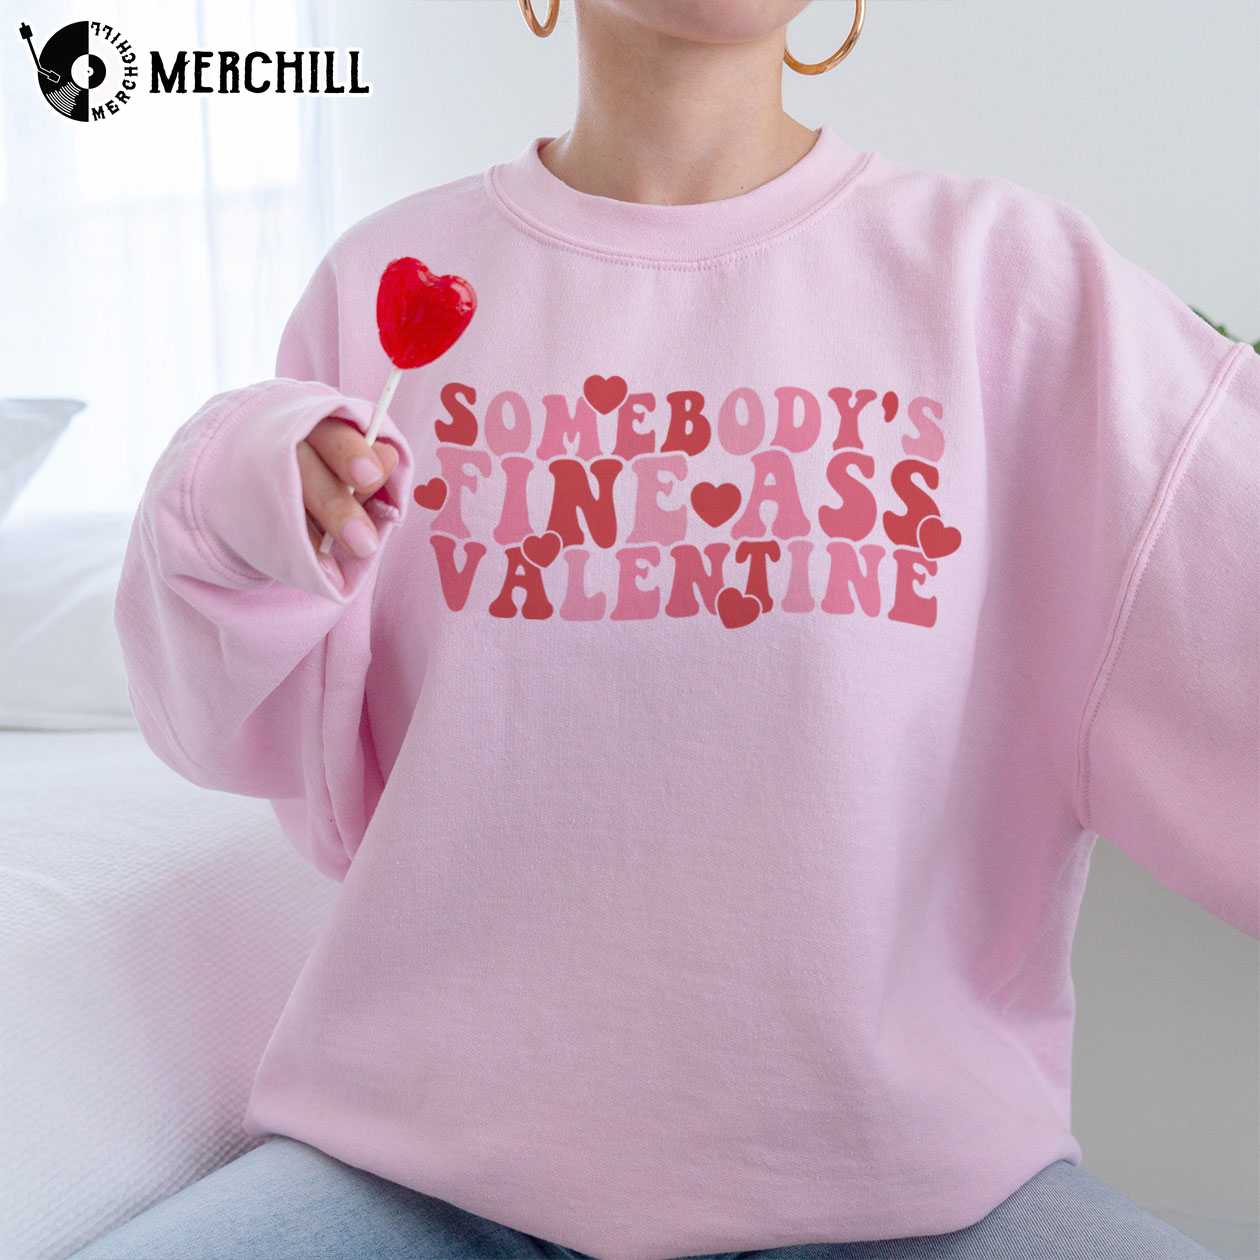 Somebody's Fine Ass Funny Valentine T Shirts for Women Valentines Gifts for  Her - Happy Place for Music Lovers